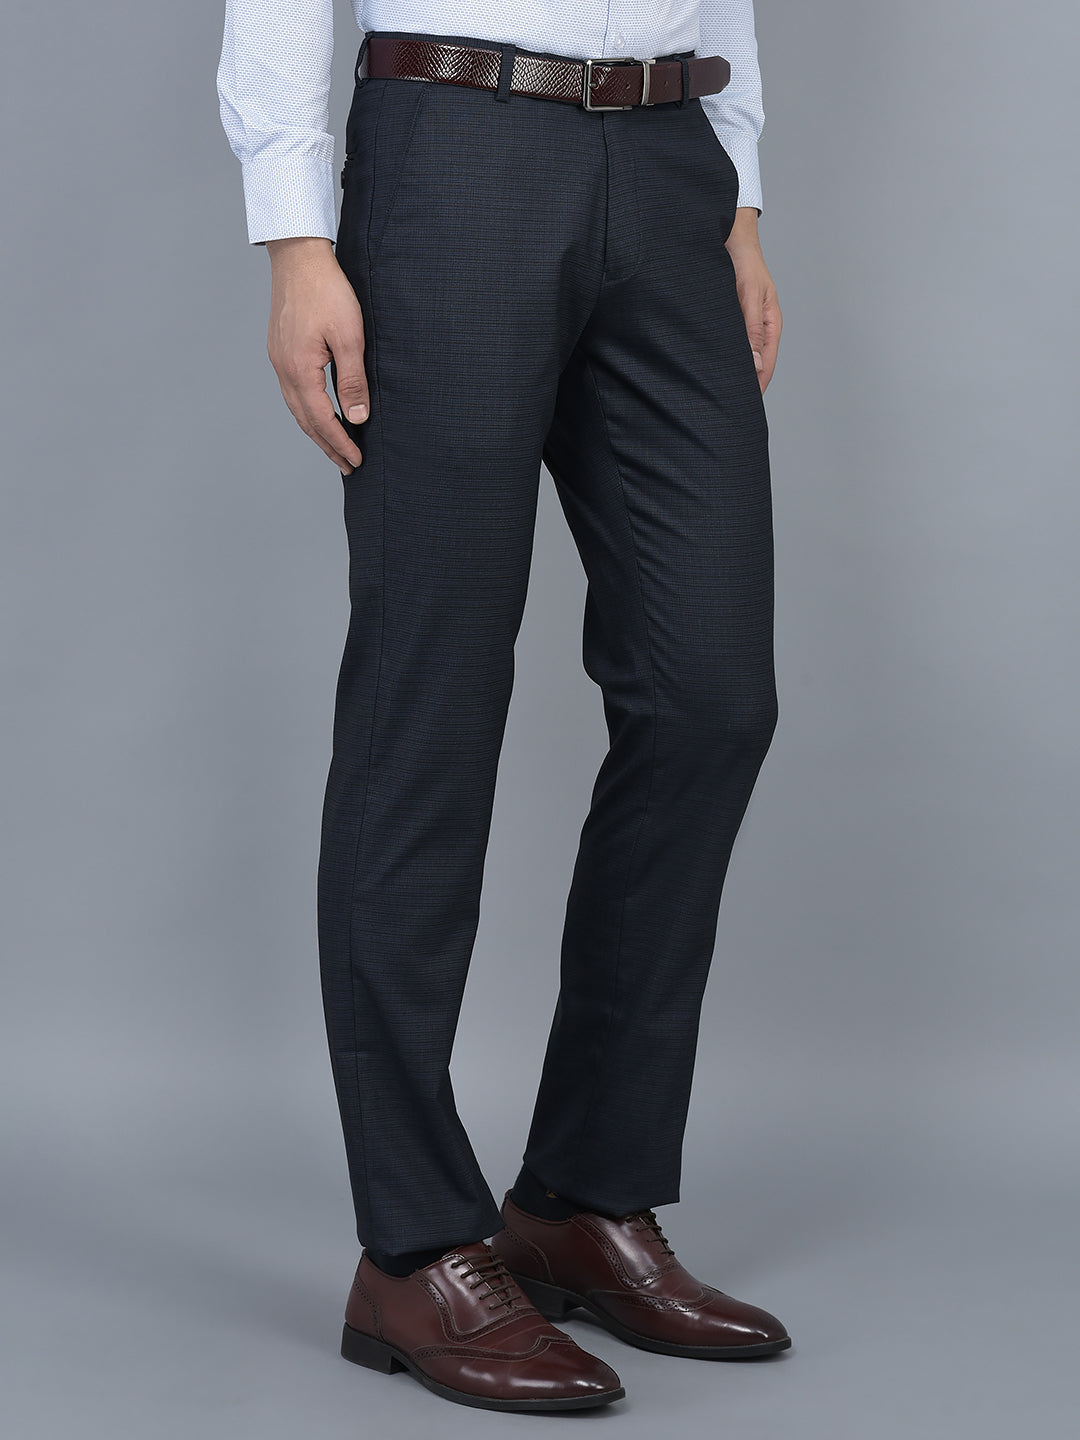 Buy Navy Blue Polyester Blend Formal Trousers For Men Online In India At  Discounted Prices